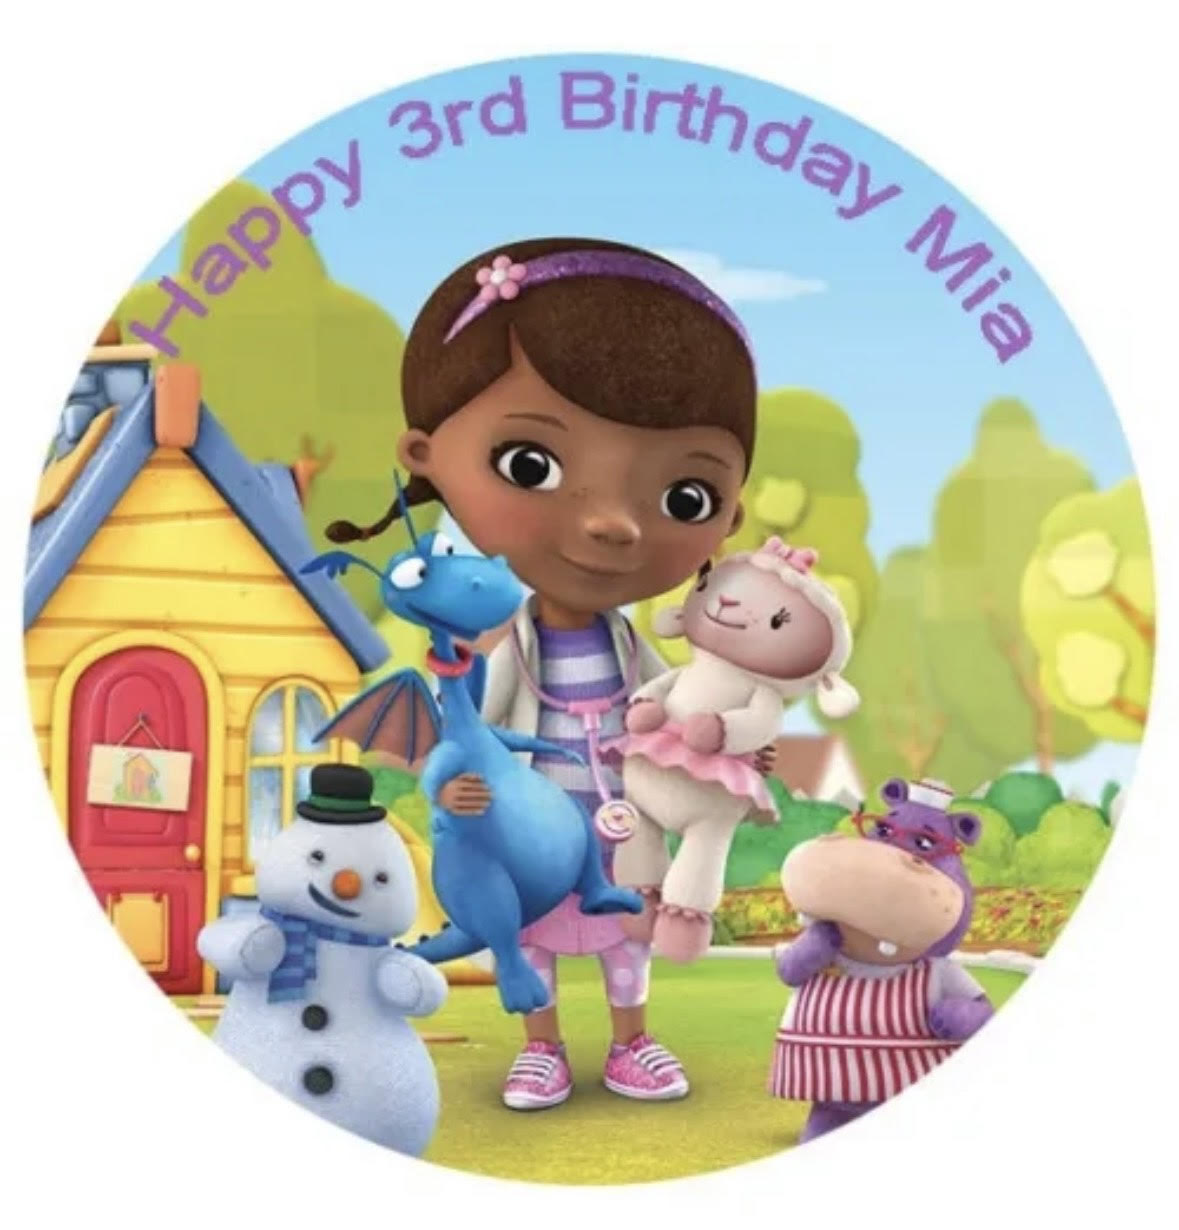 Doc McStuffins Round Cake Edible Icing Image Topper 19cm